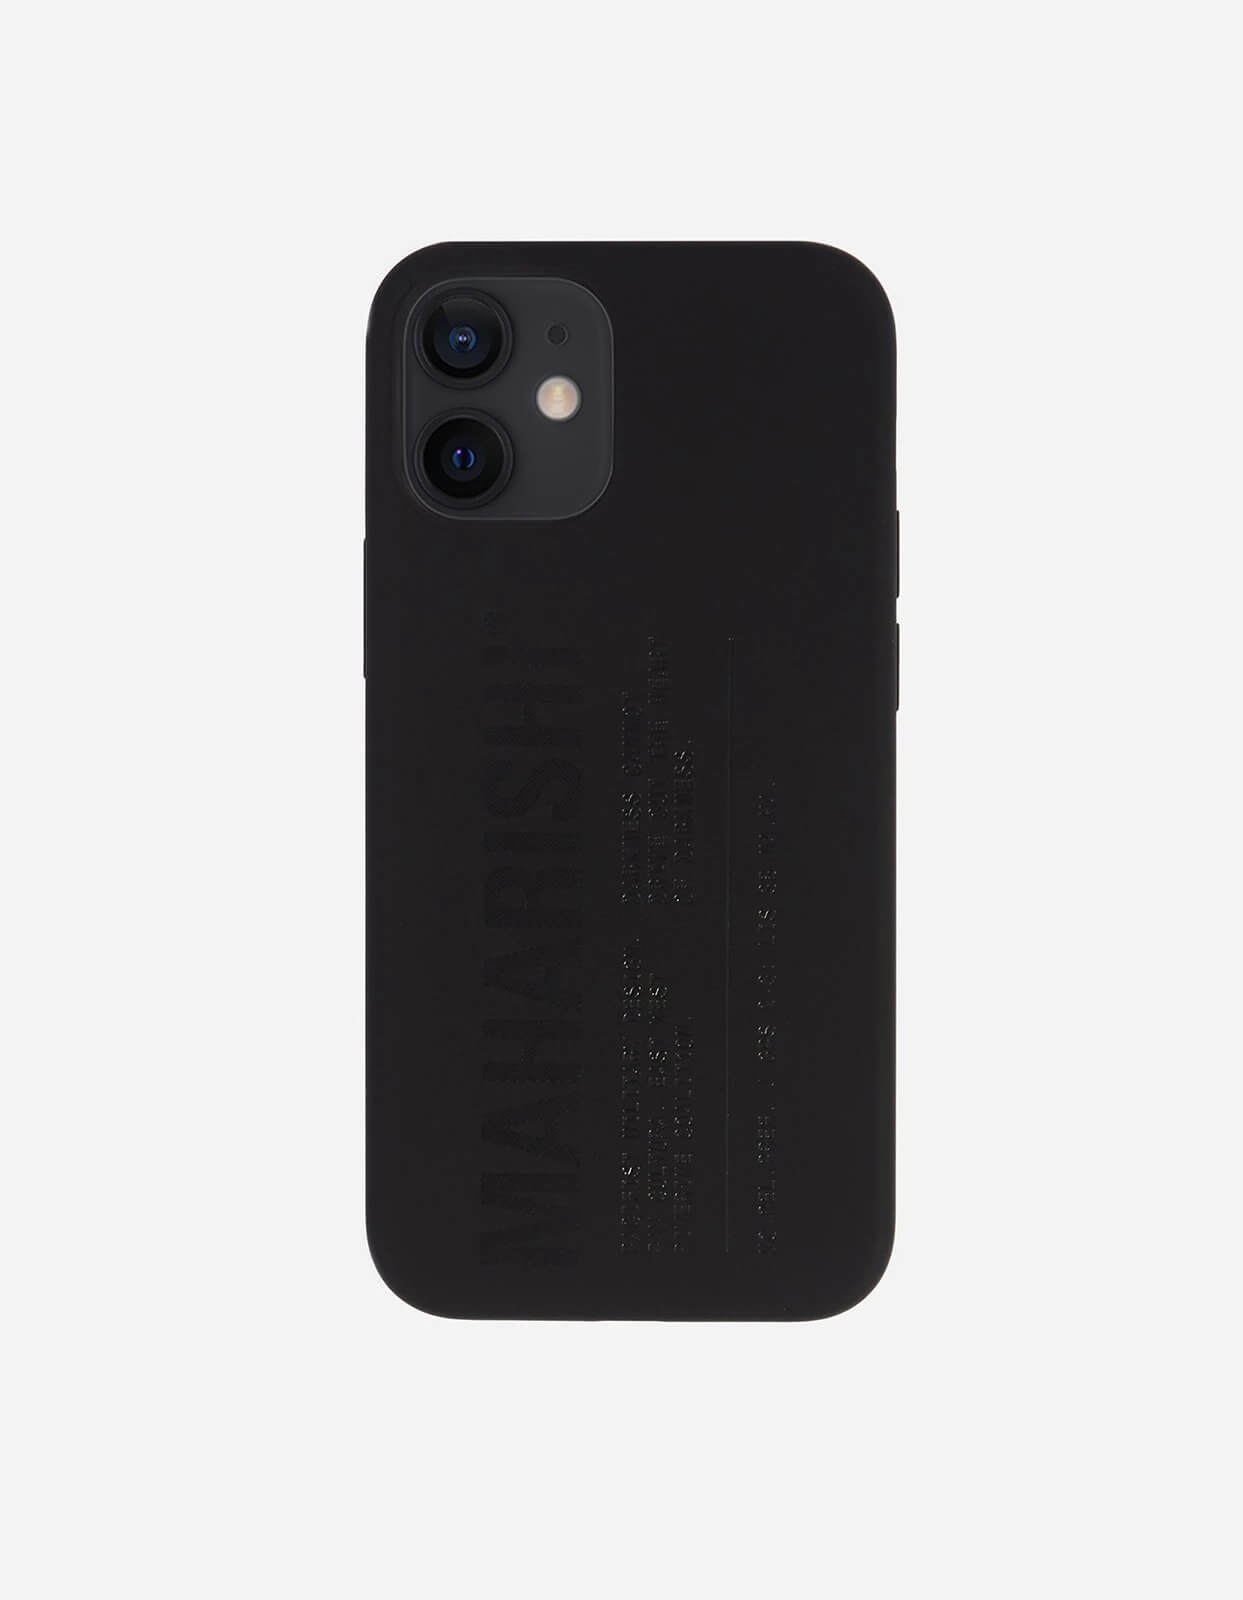 ss21_9353-in-mold-iphone-12-12-pro-case-miltype_black_10